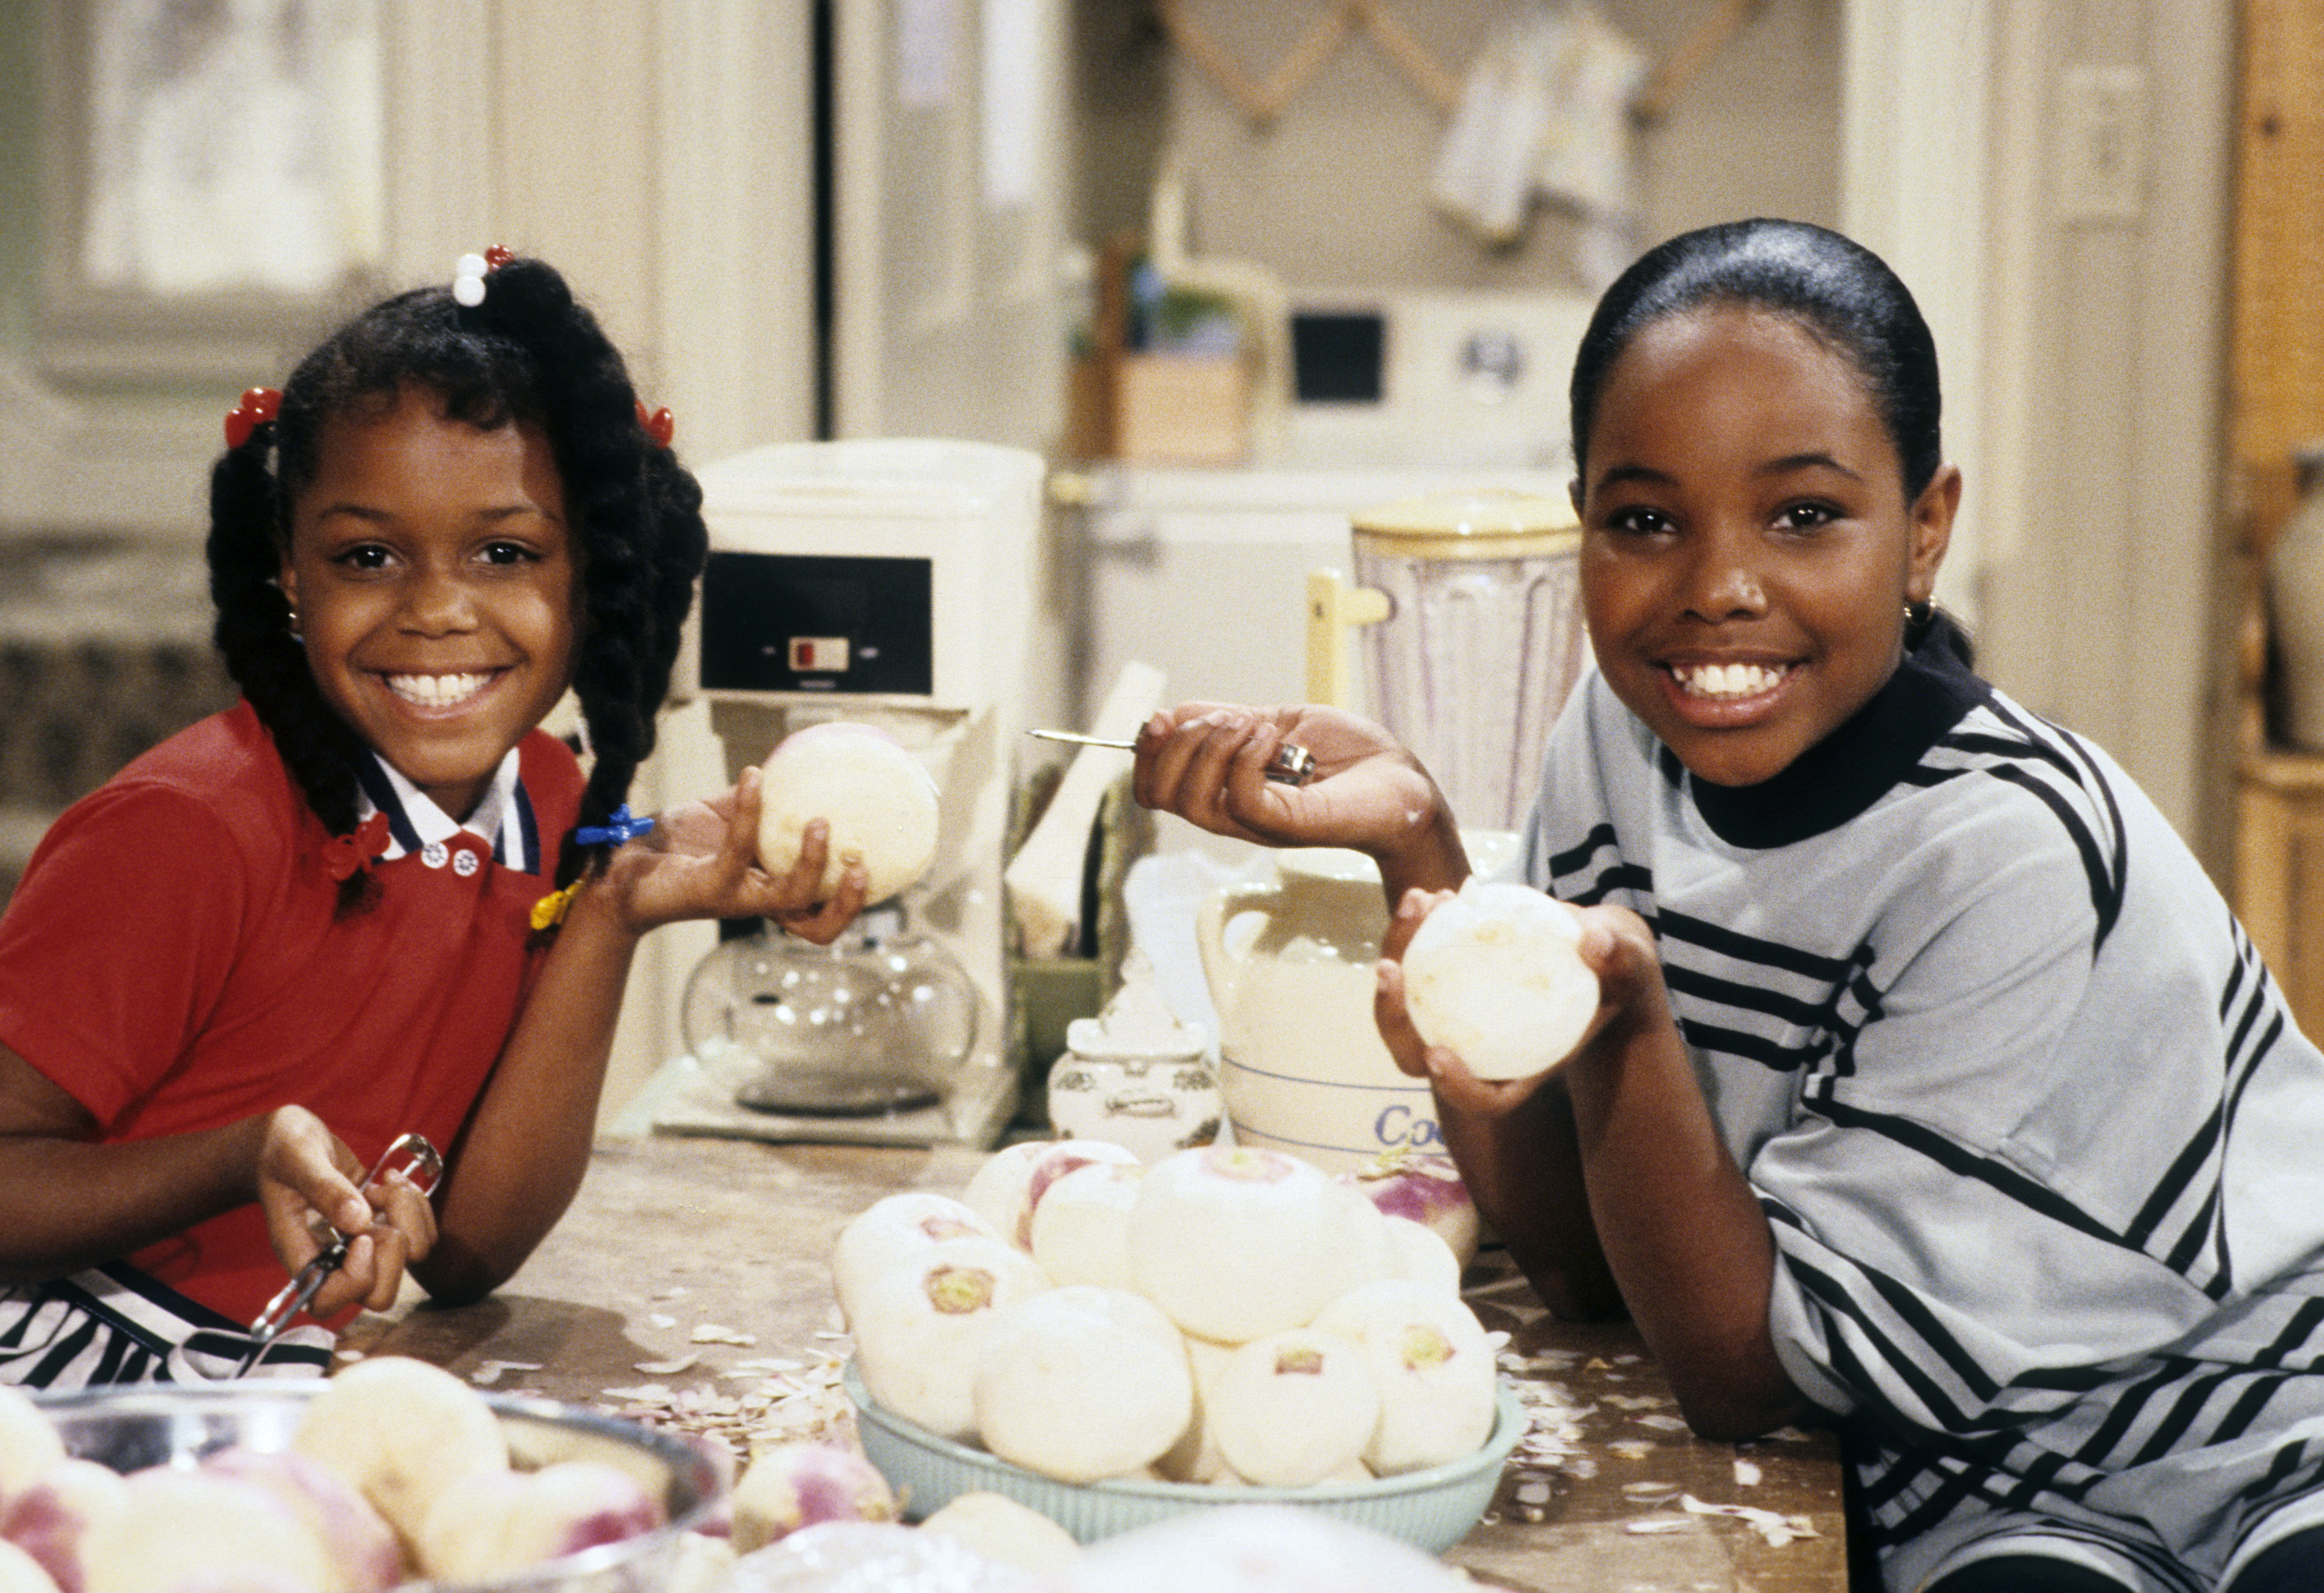 Jaimee Foxworth and Kellie Shanygne Williams on set for "Family Matters," in September 1989. | Source: Getty Images